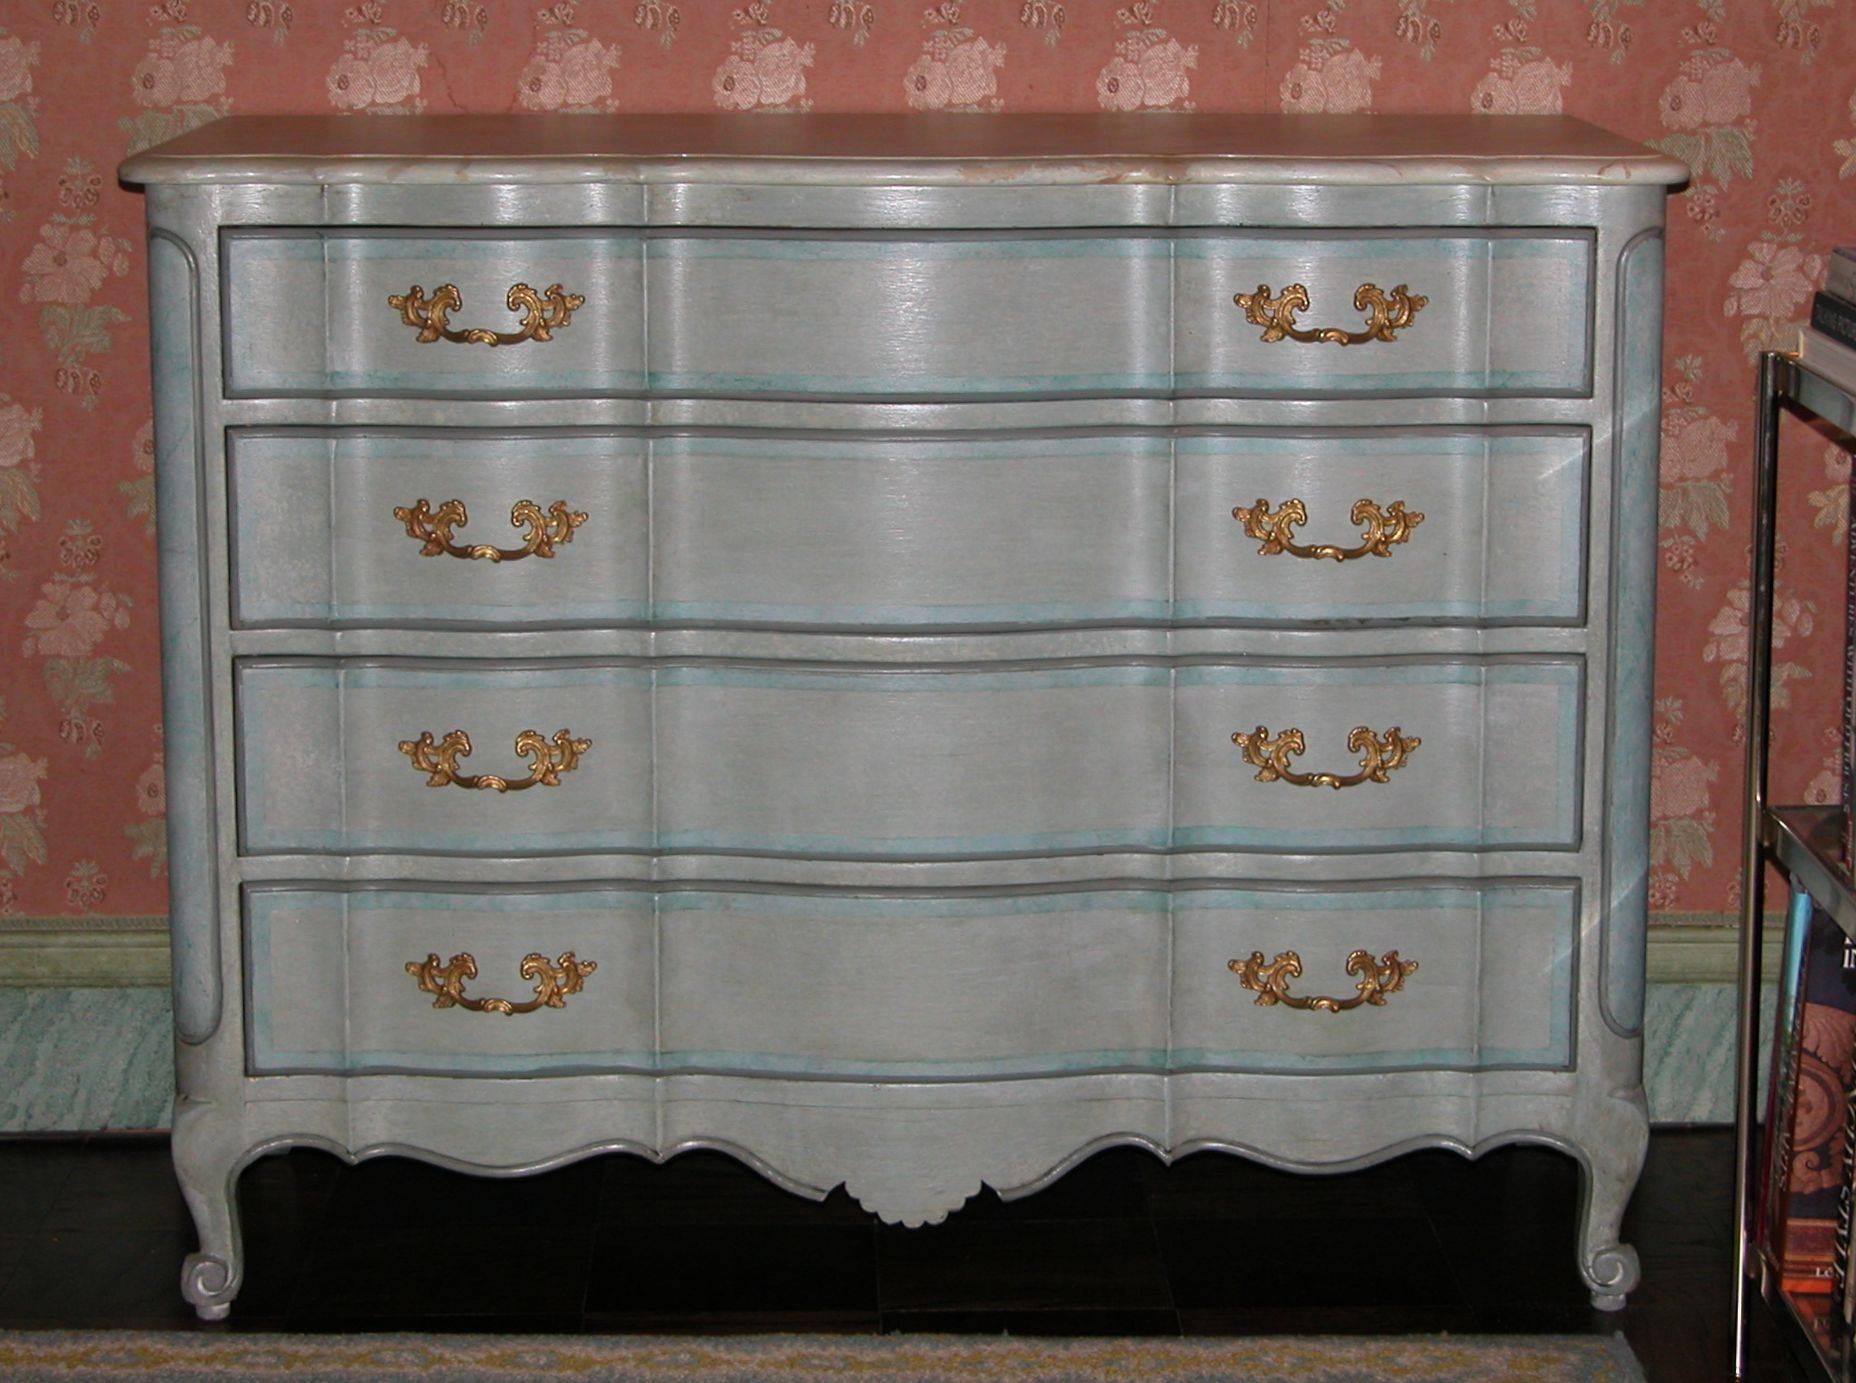 Louis XV style chest with four drawers, each lined in a white on white cotton stripe fabric. Excellent condition. A beautiful modeled blue finish with marbleized top.